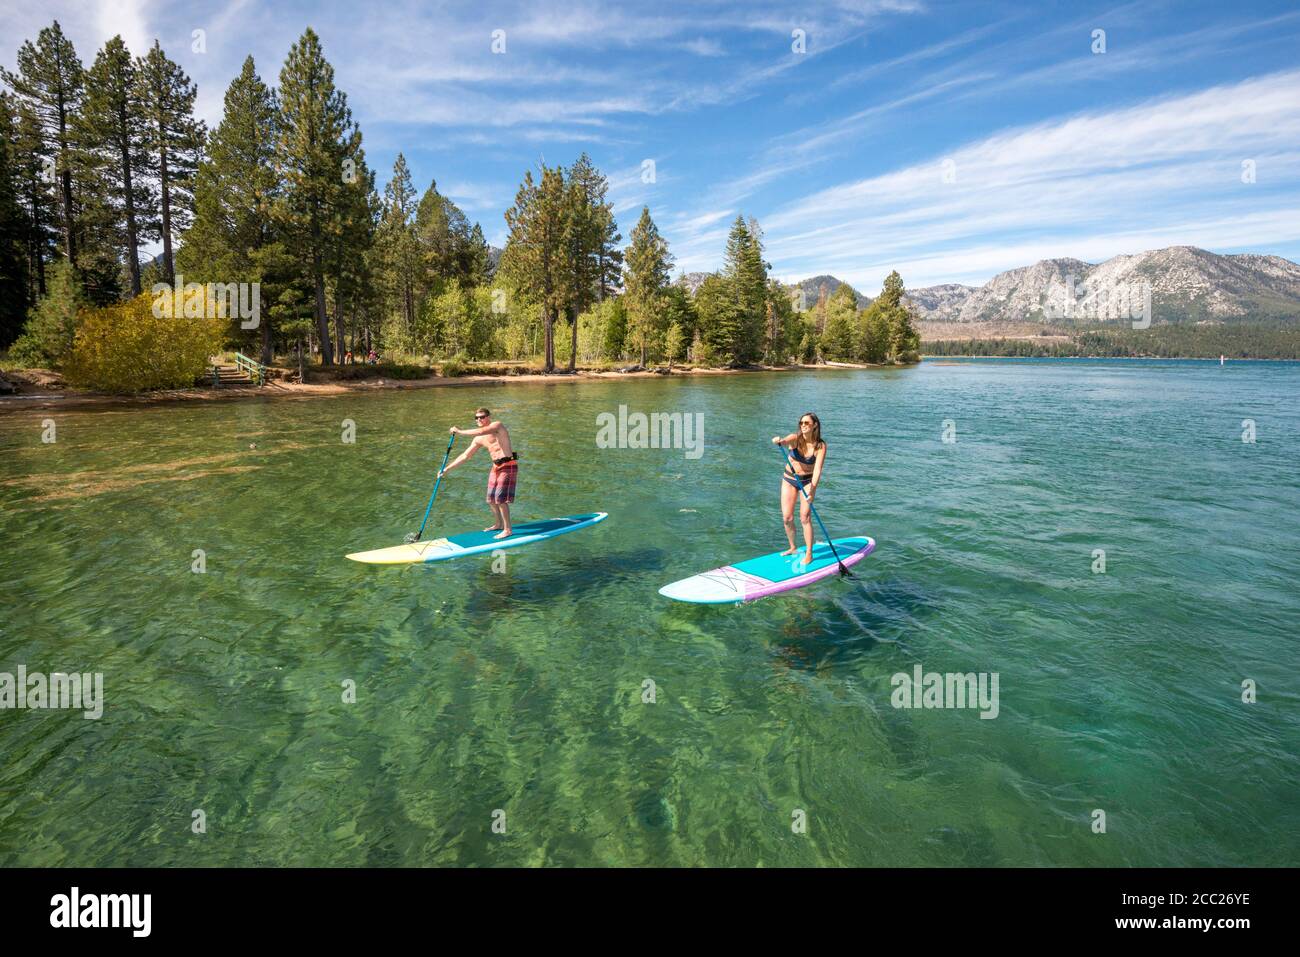 Two paddle-boarders enjoy a summer morning exploring the beautiful clear waters of South Lake Tahoe, California. Stock Photo